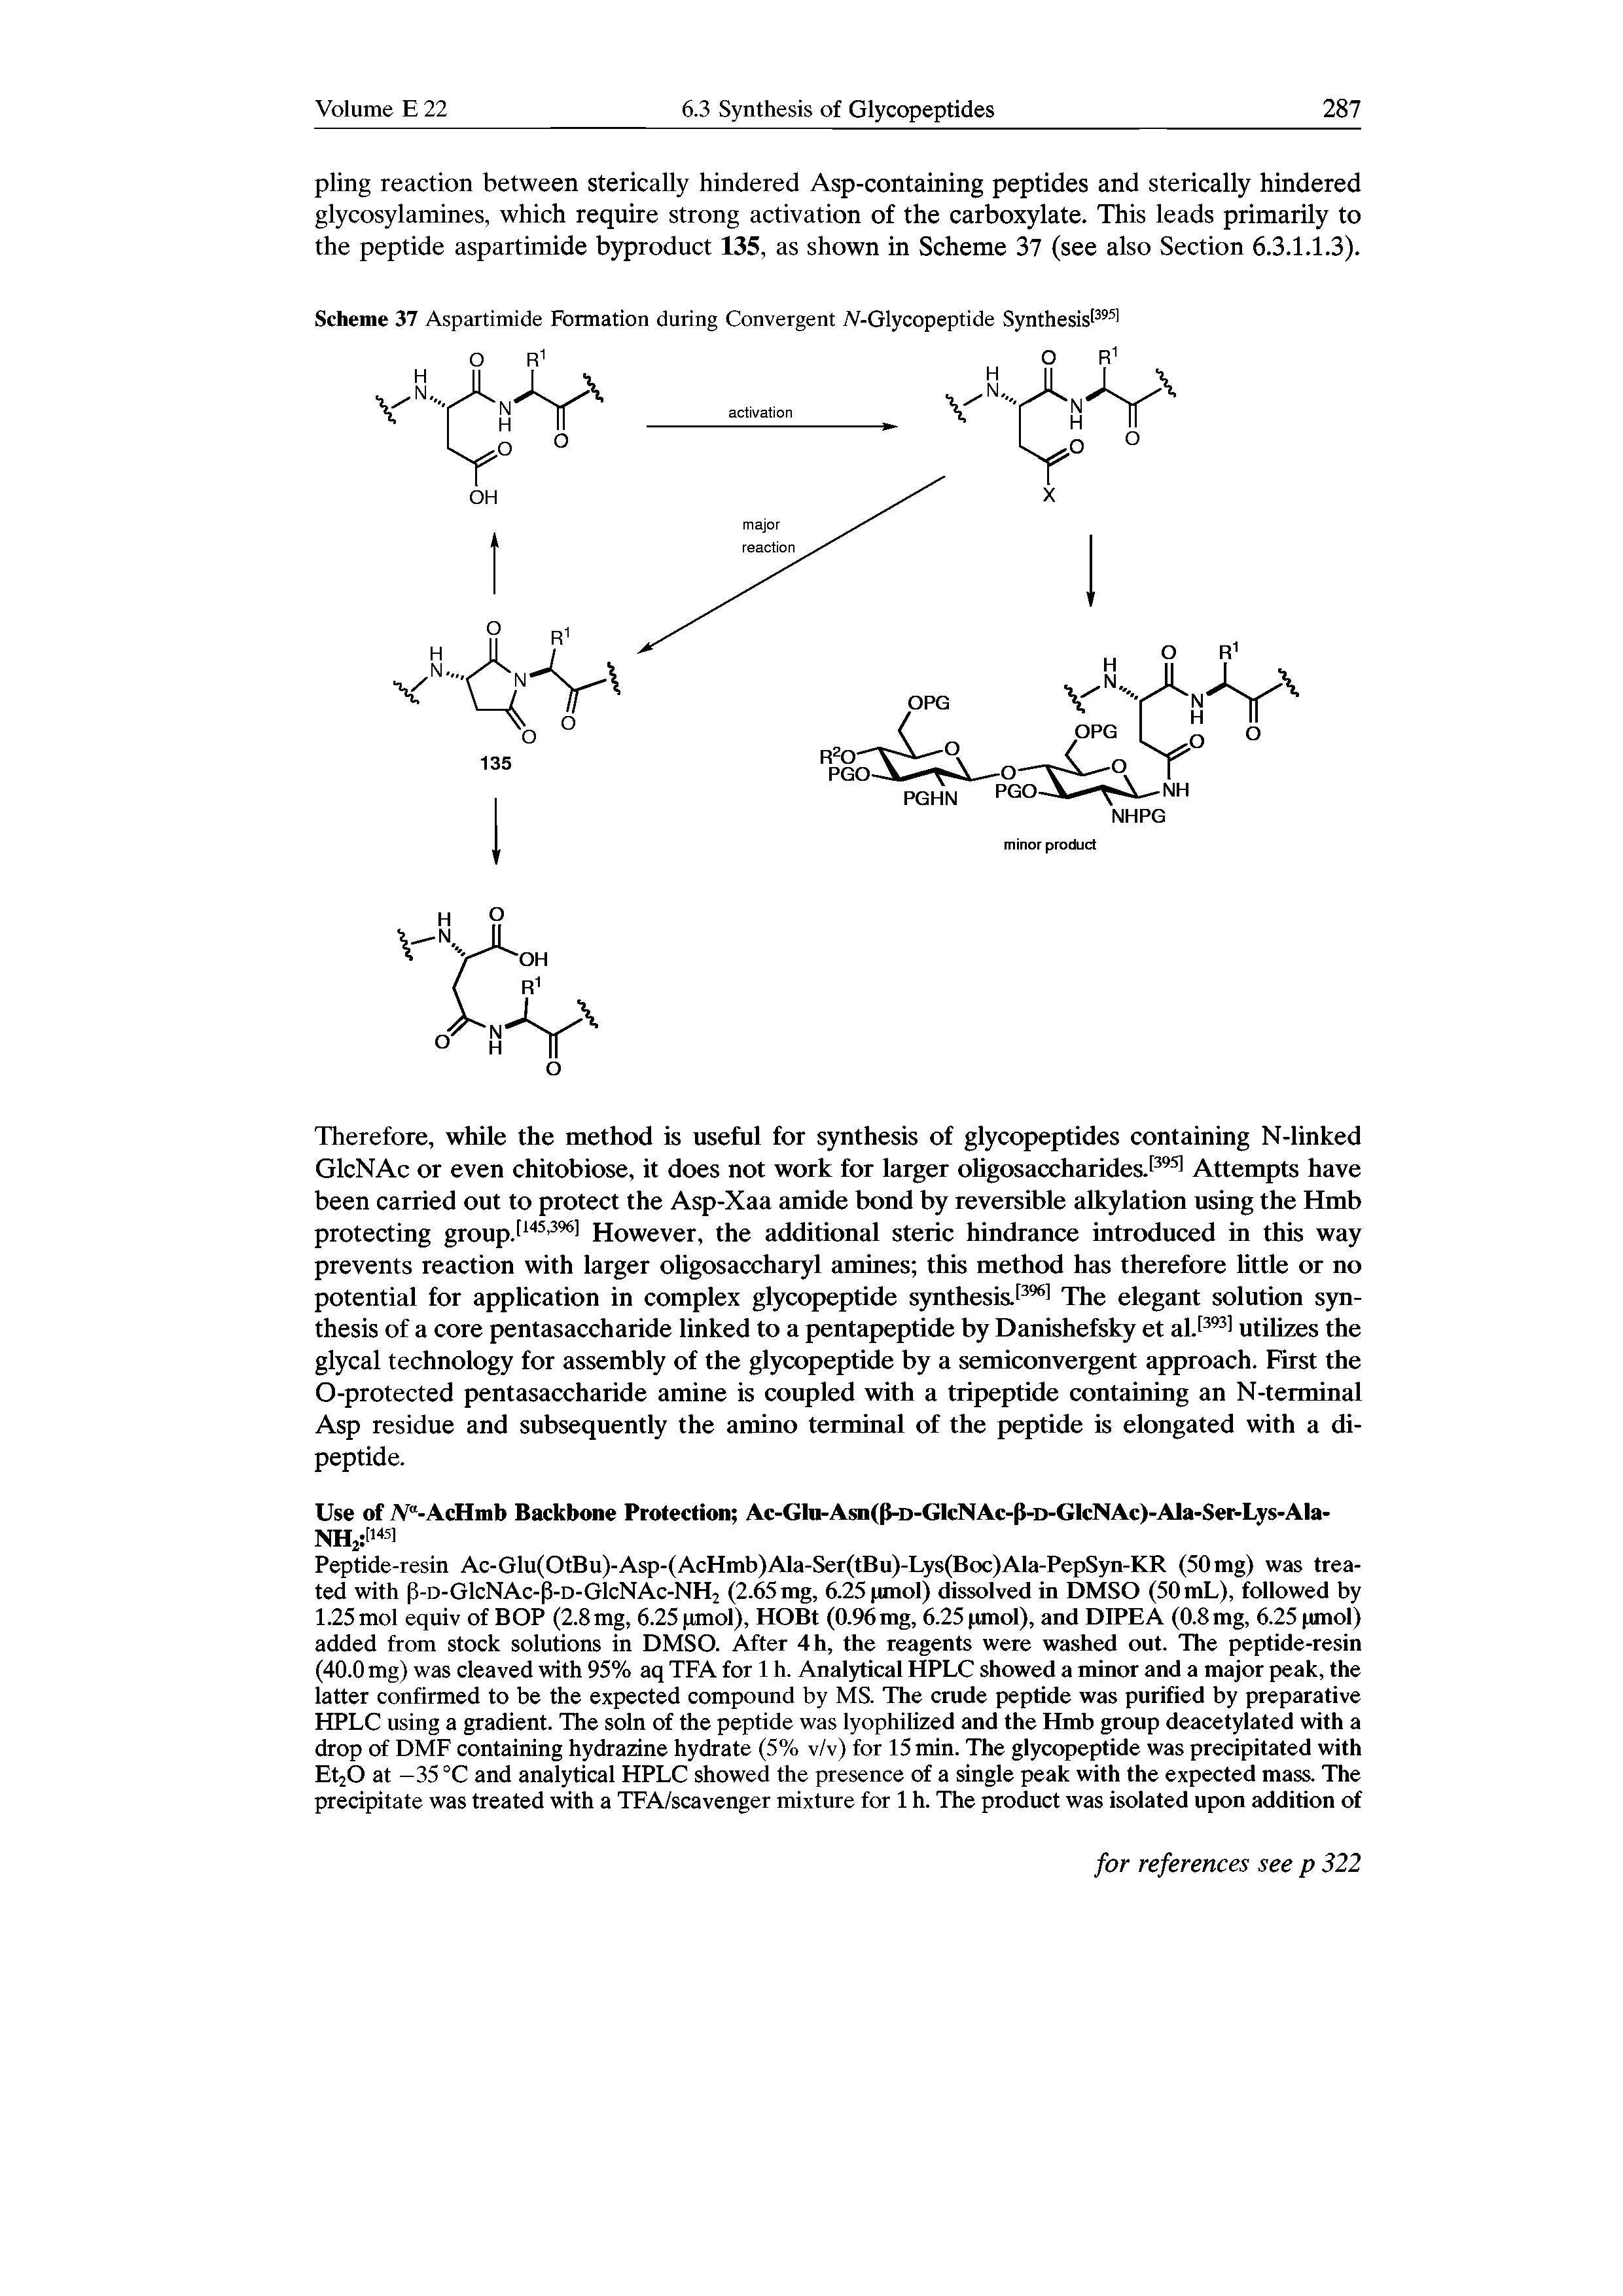 Scheme 37 Aspartimide Formation during Convergent /V-Glycopeptide Synthesis 3951...